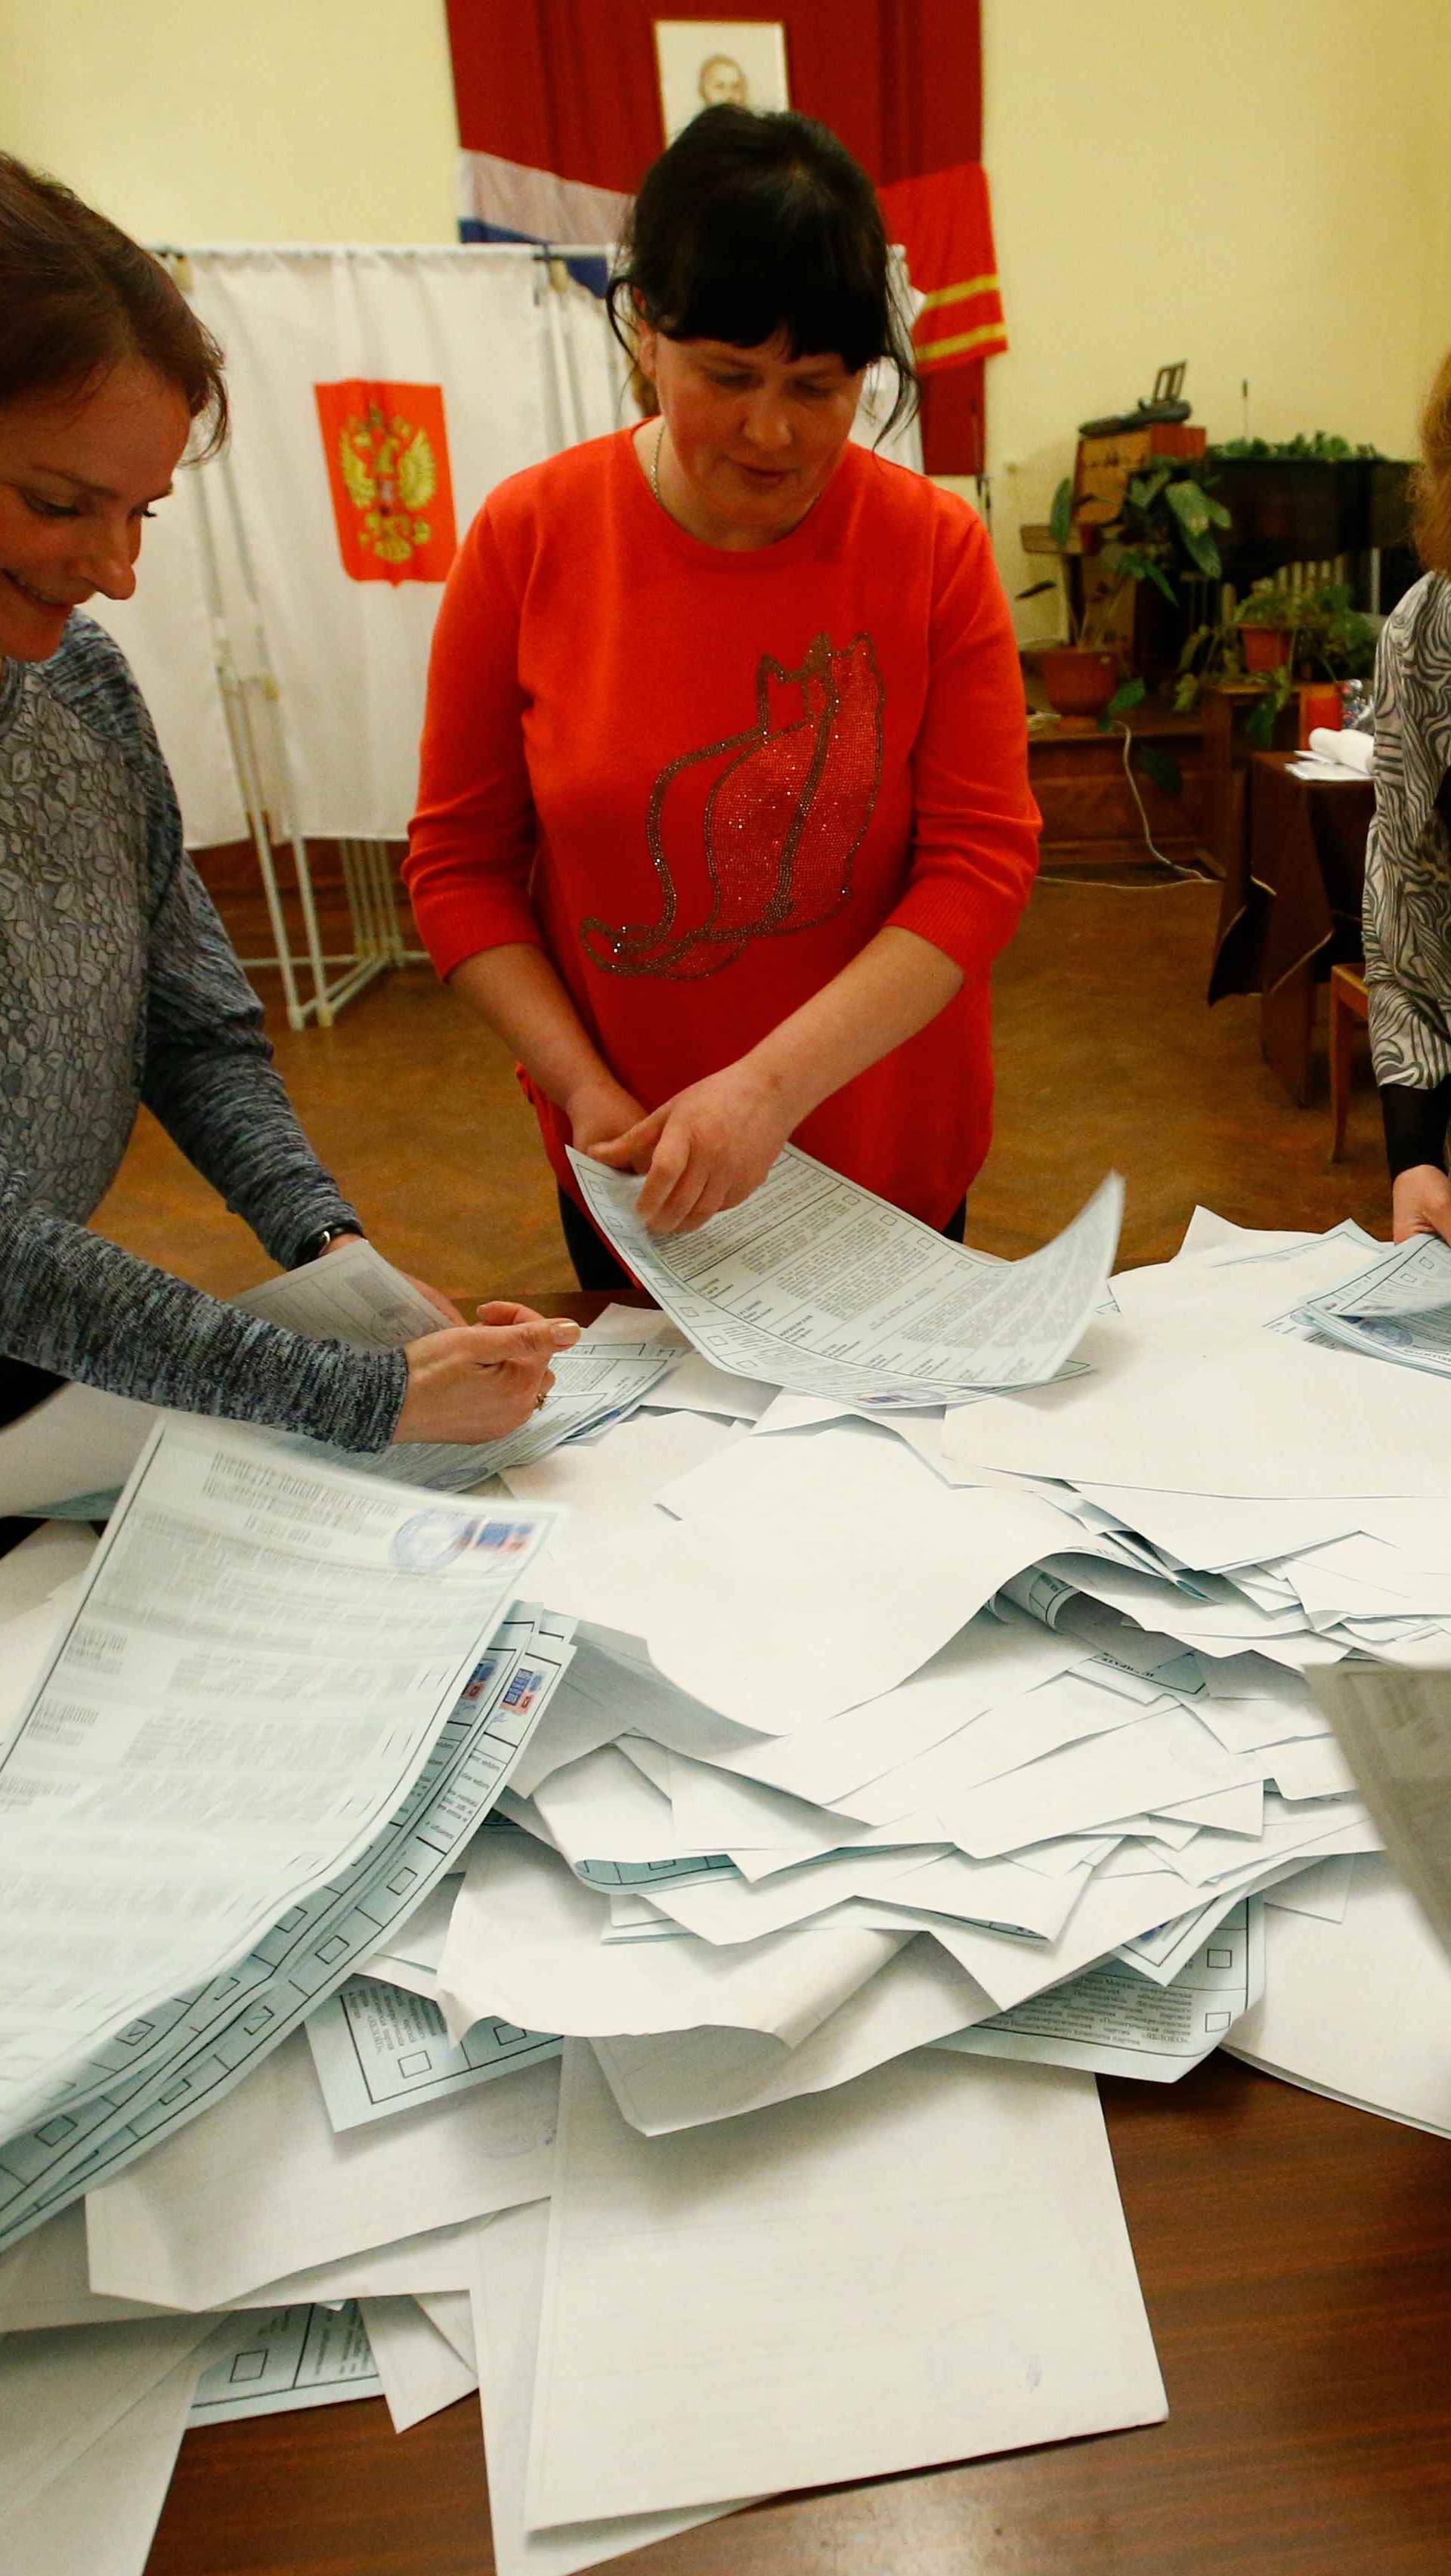 Members of a local election commission sort ballots before starting to count votes during the presidential election at a polling station in a settlement in Smolensk Region